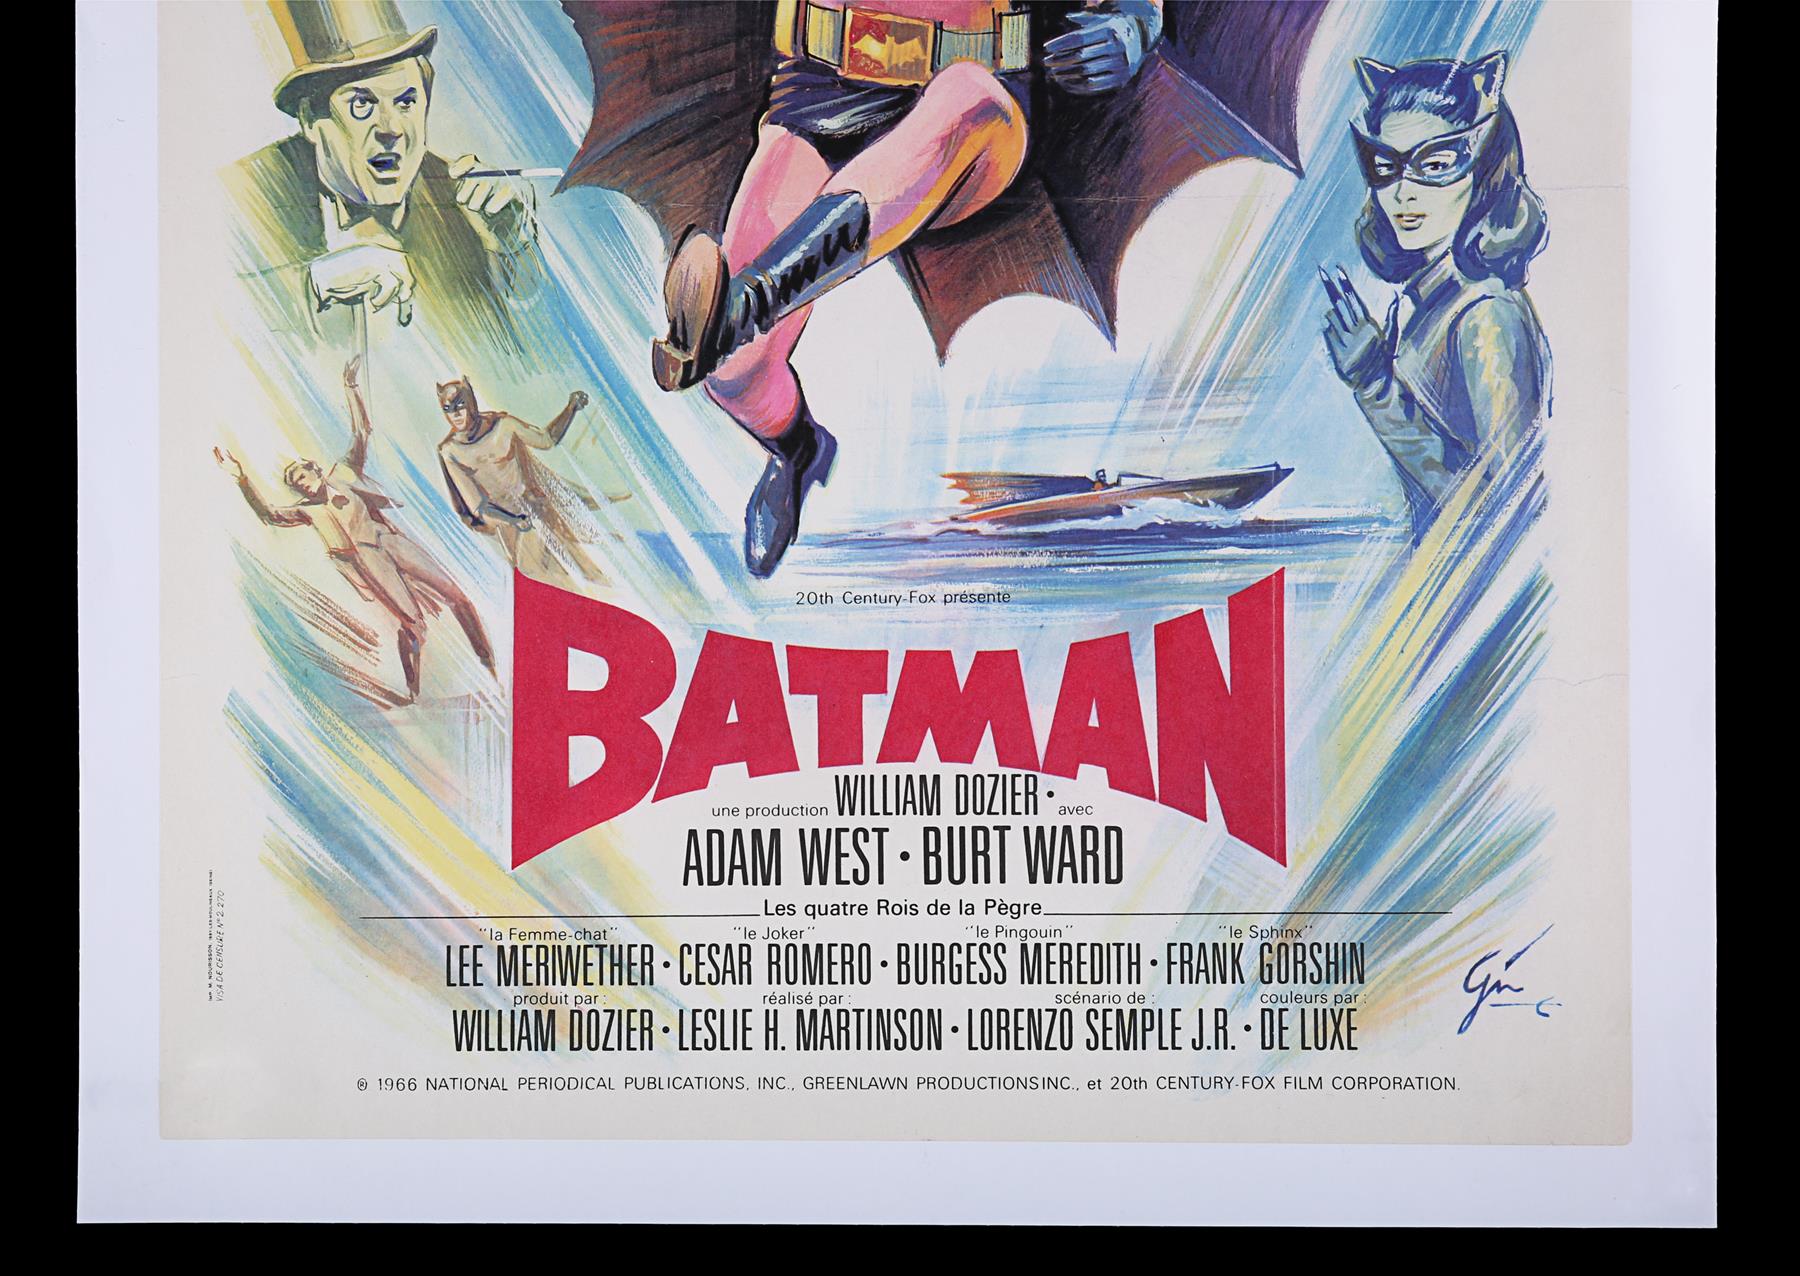 BATMAN (1966) - French 'Small' Affiche, 1966 - Image 4 of 6